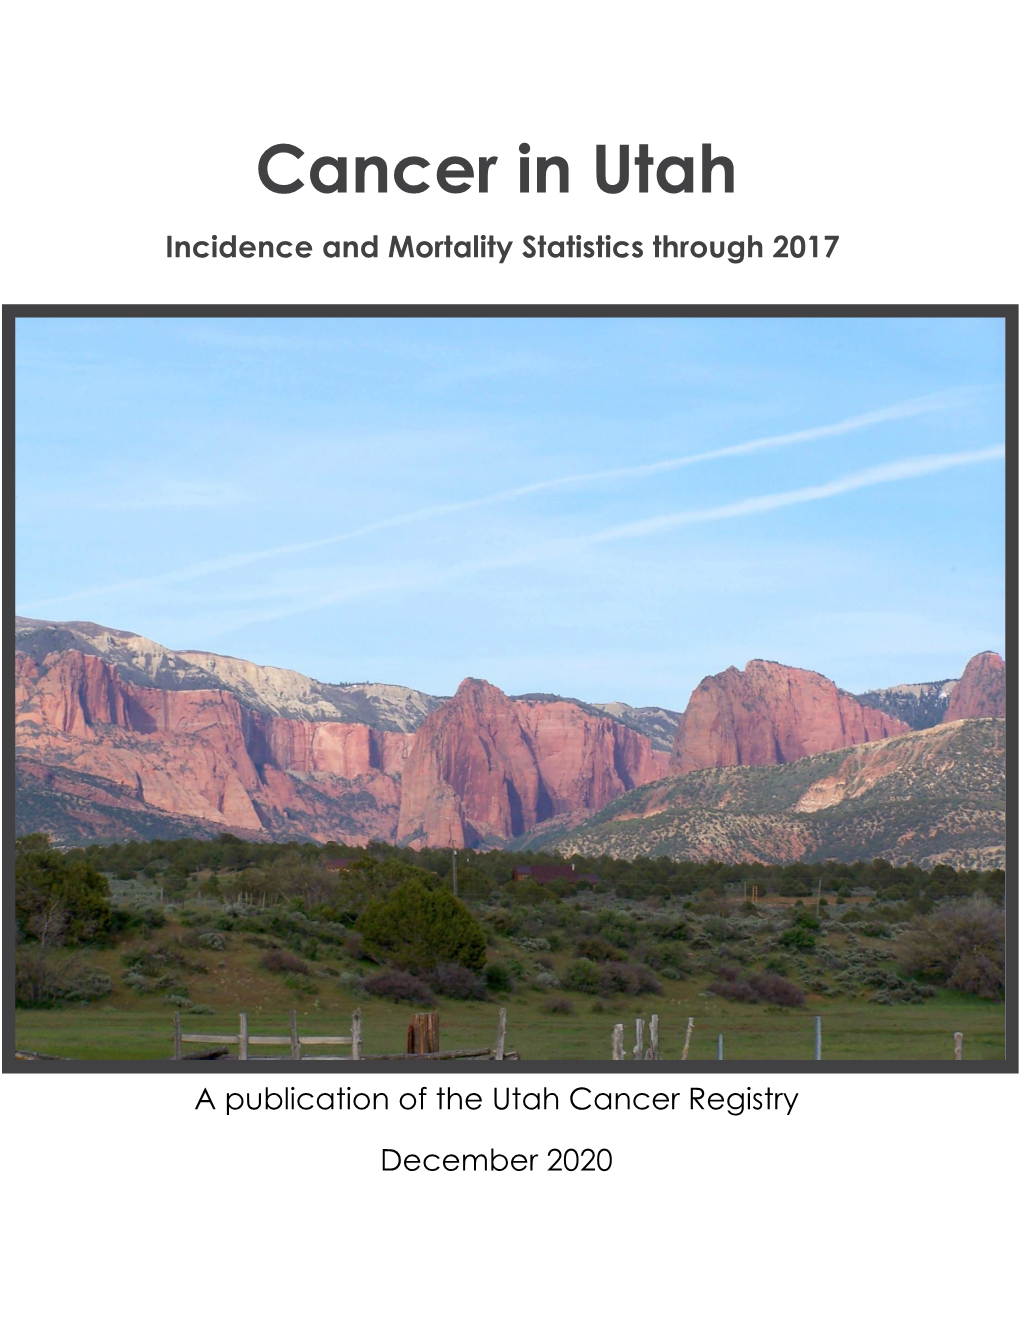 Cancer in Utah: Incidence and Mortality Statistics Through 2017